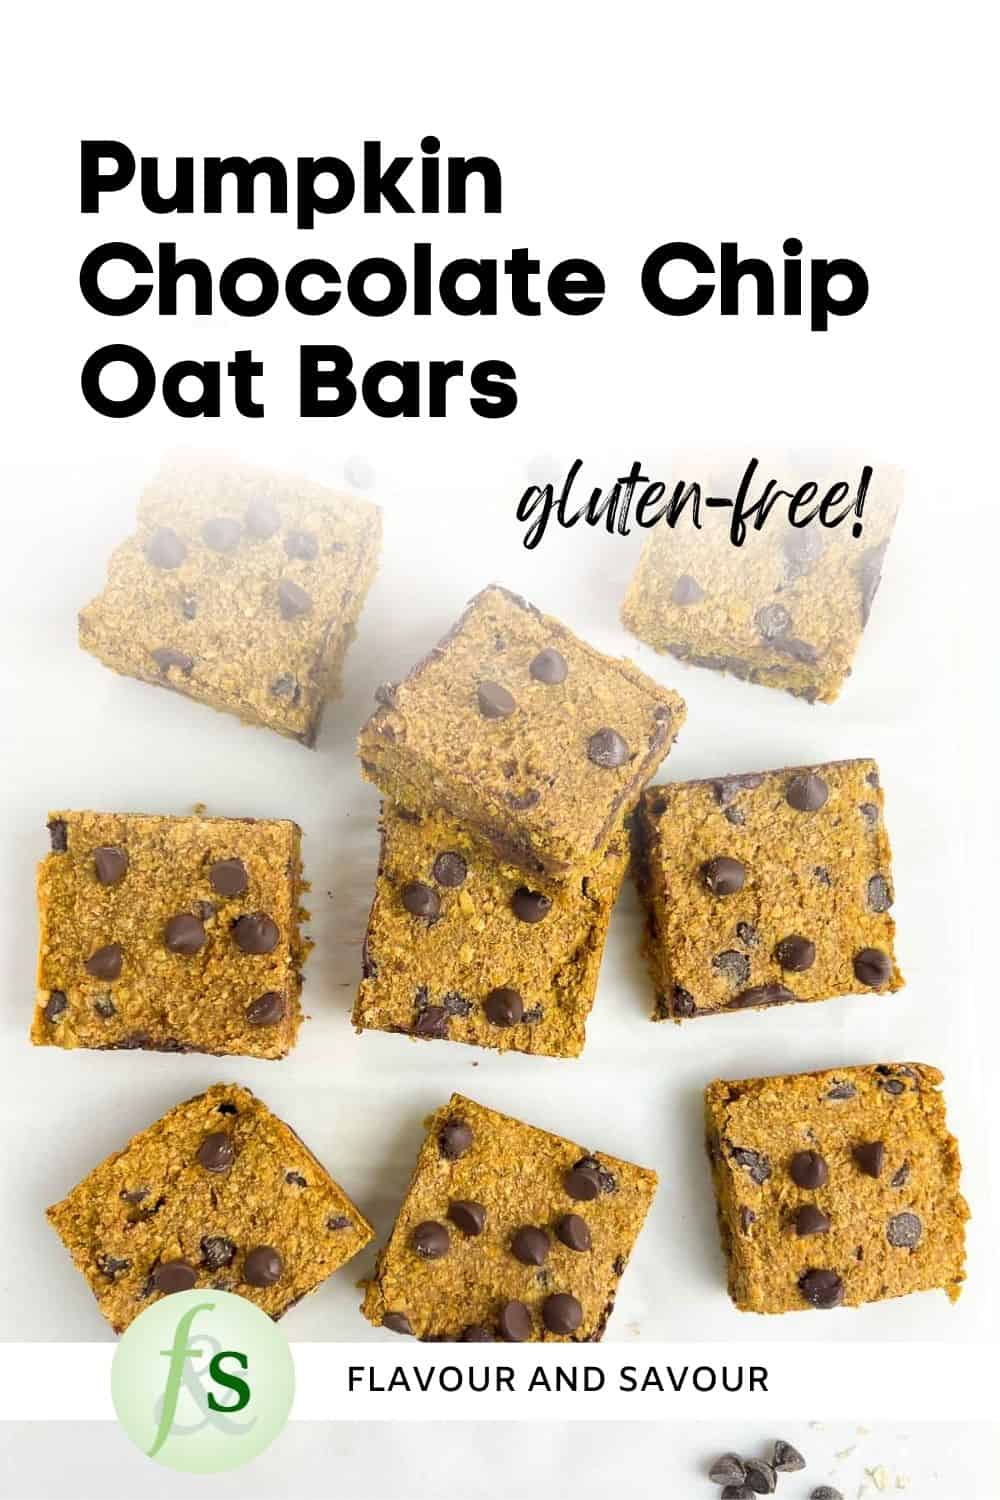 Image with text overlay for Pumpkin Chocolate Chip Oat Bars.